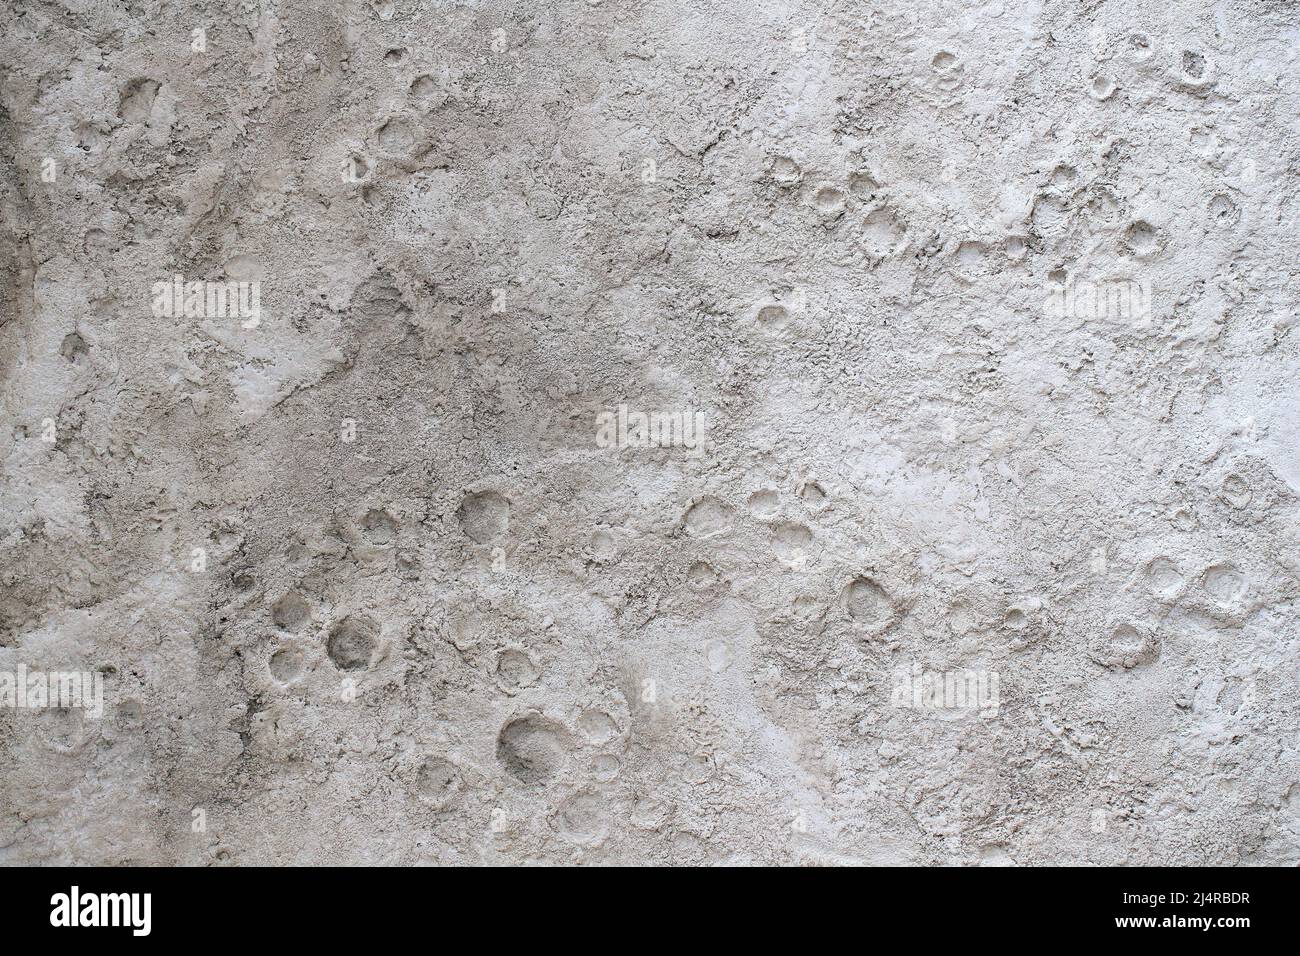 Grey background, textured wall covering close up Stock Photo